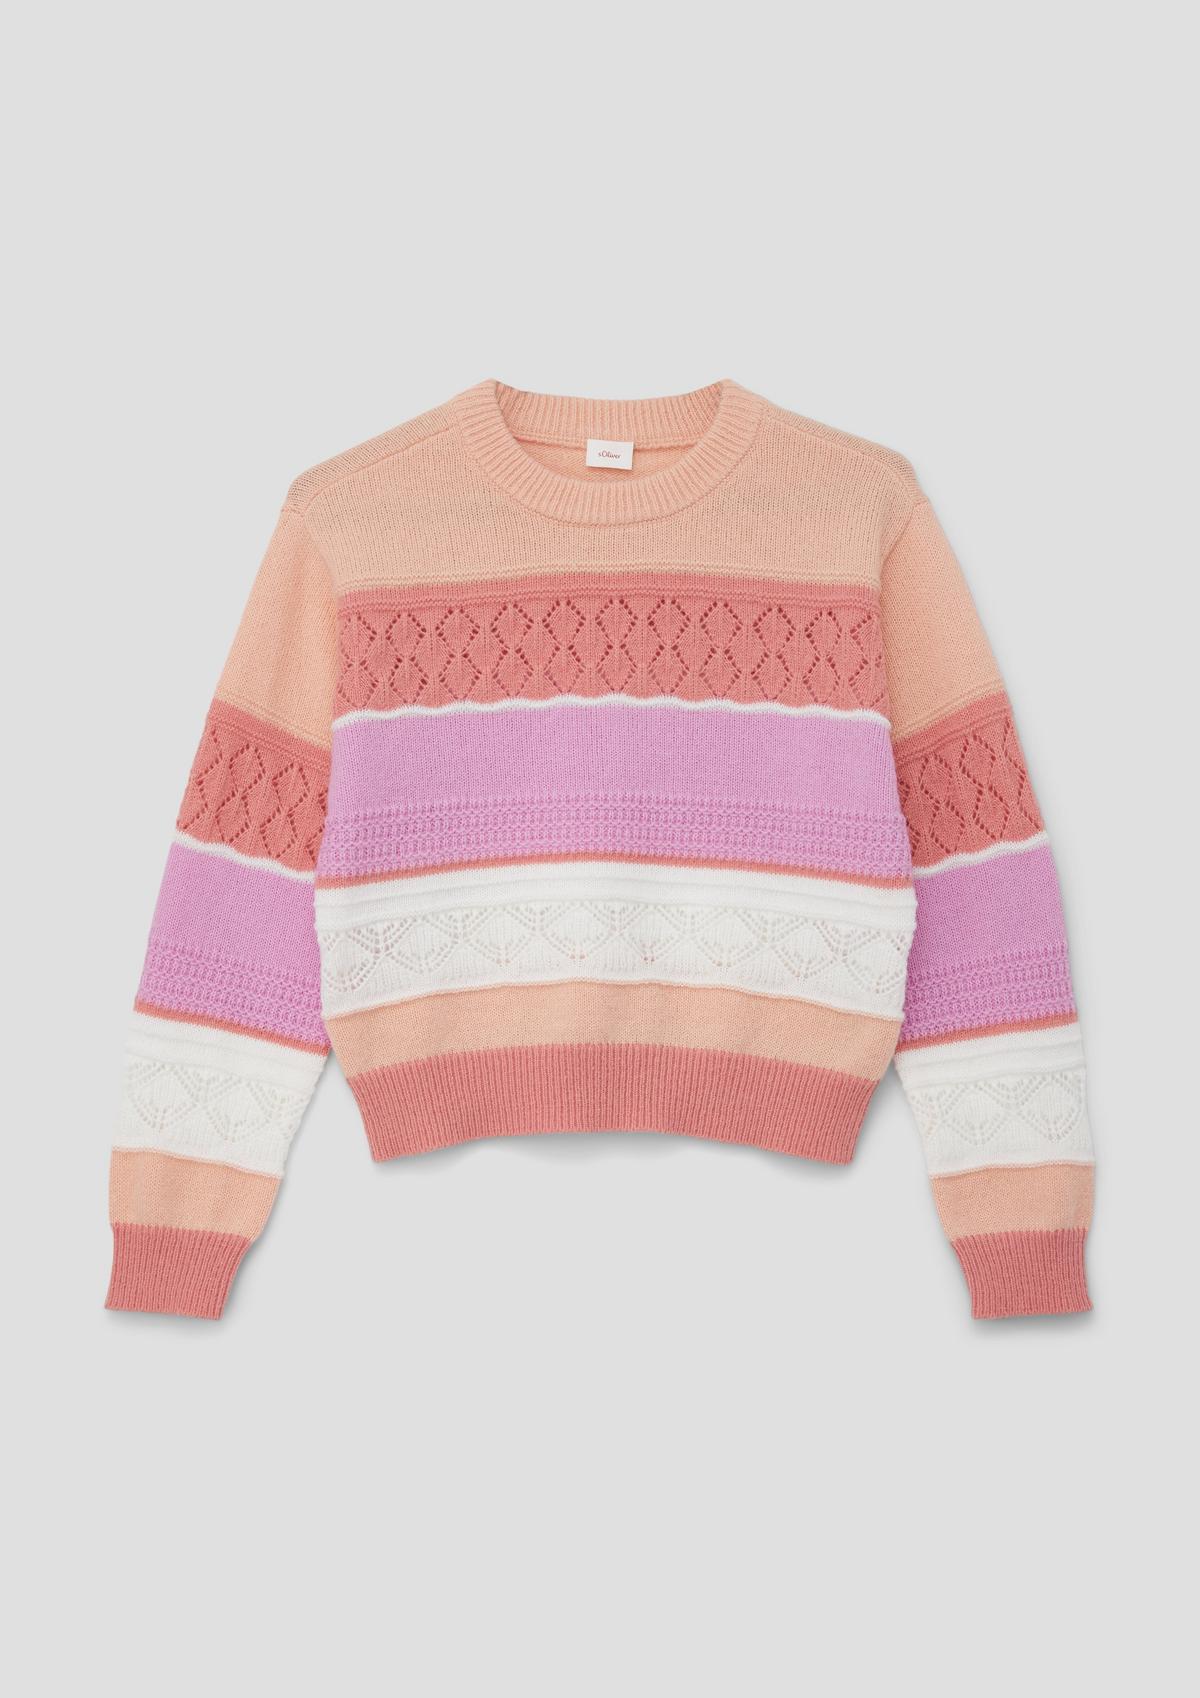 Sweatshirts and knitwear for girls and teens